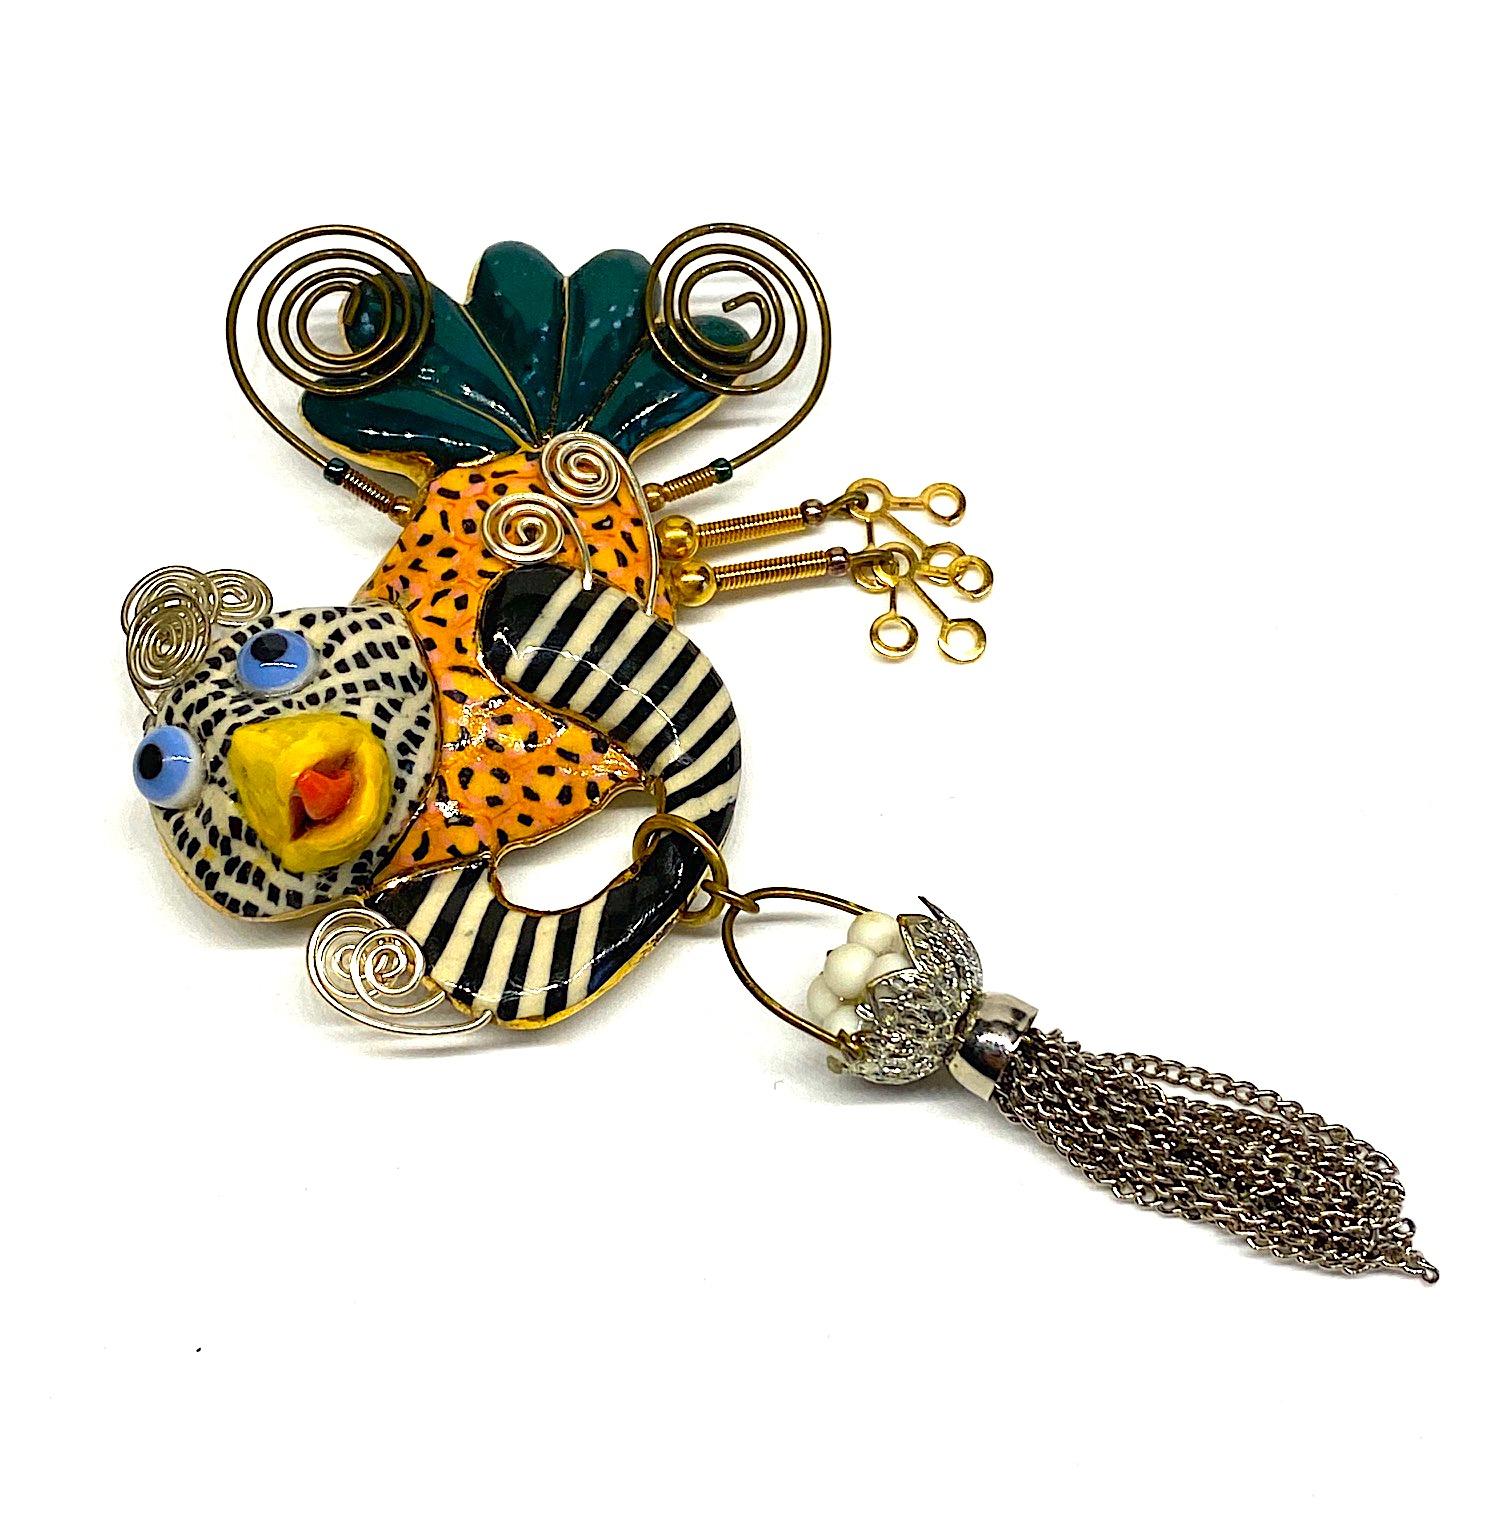 Cynthia Chuang, Jewelry 10, Porcelain & Glass Chicken with Basket Brooch 2